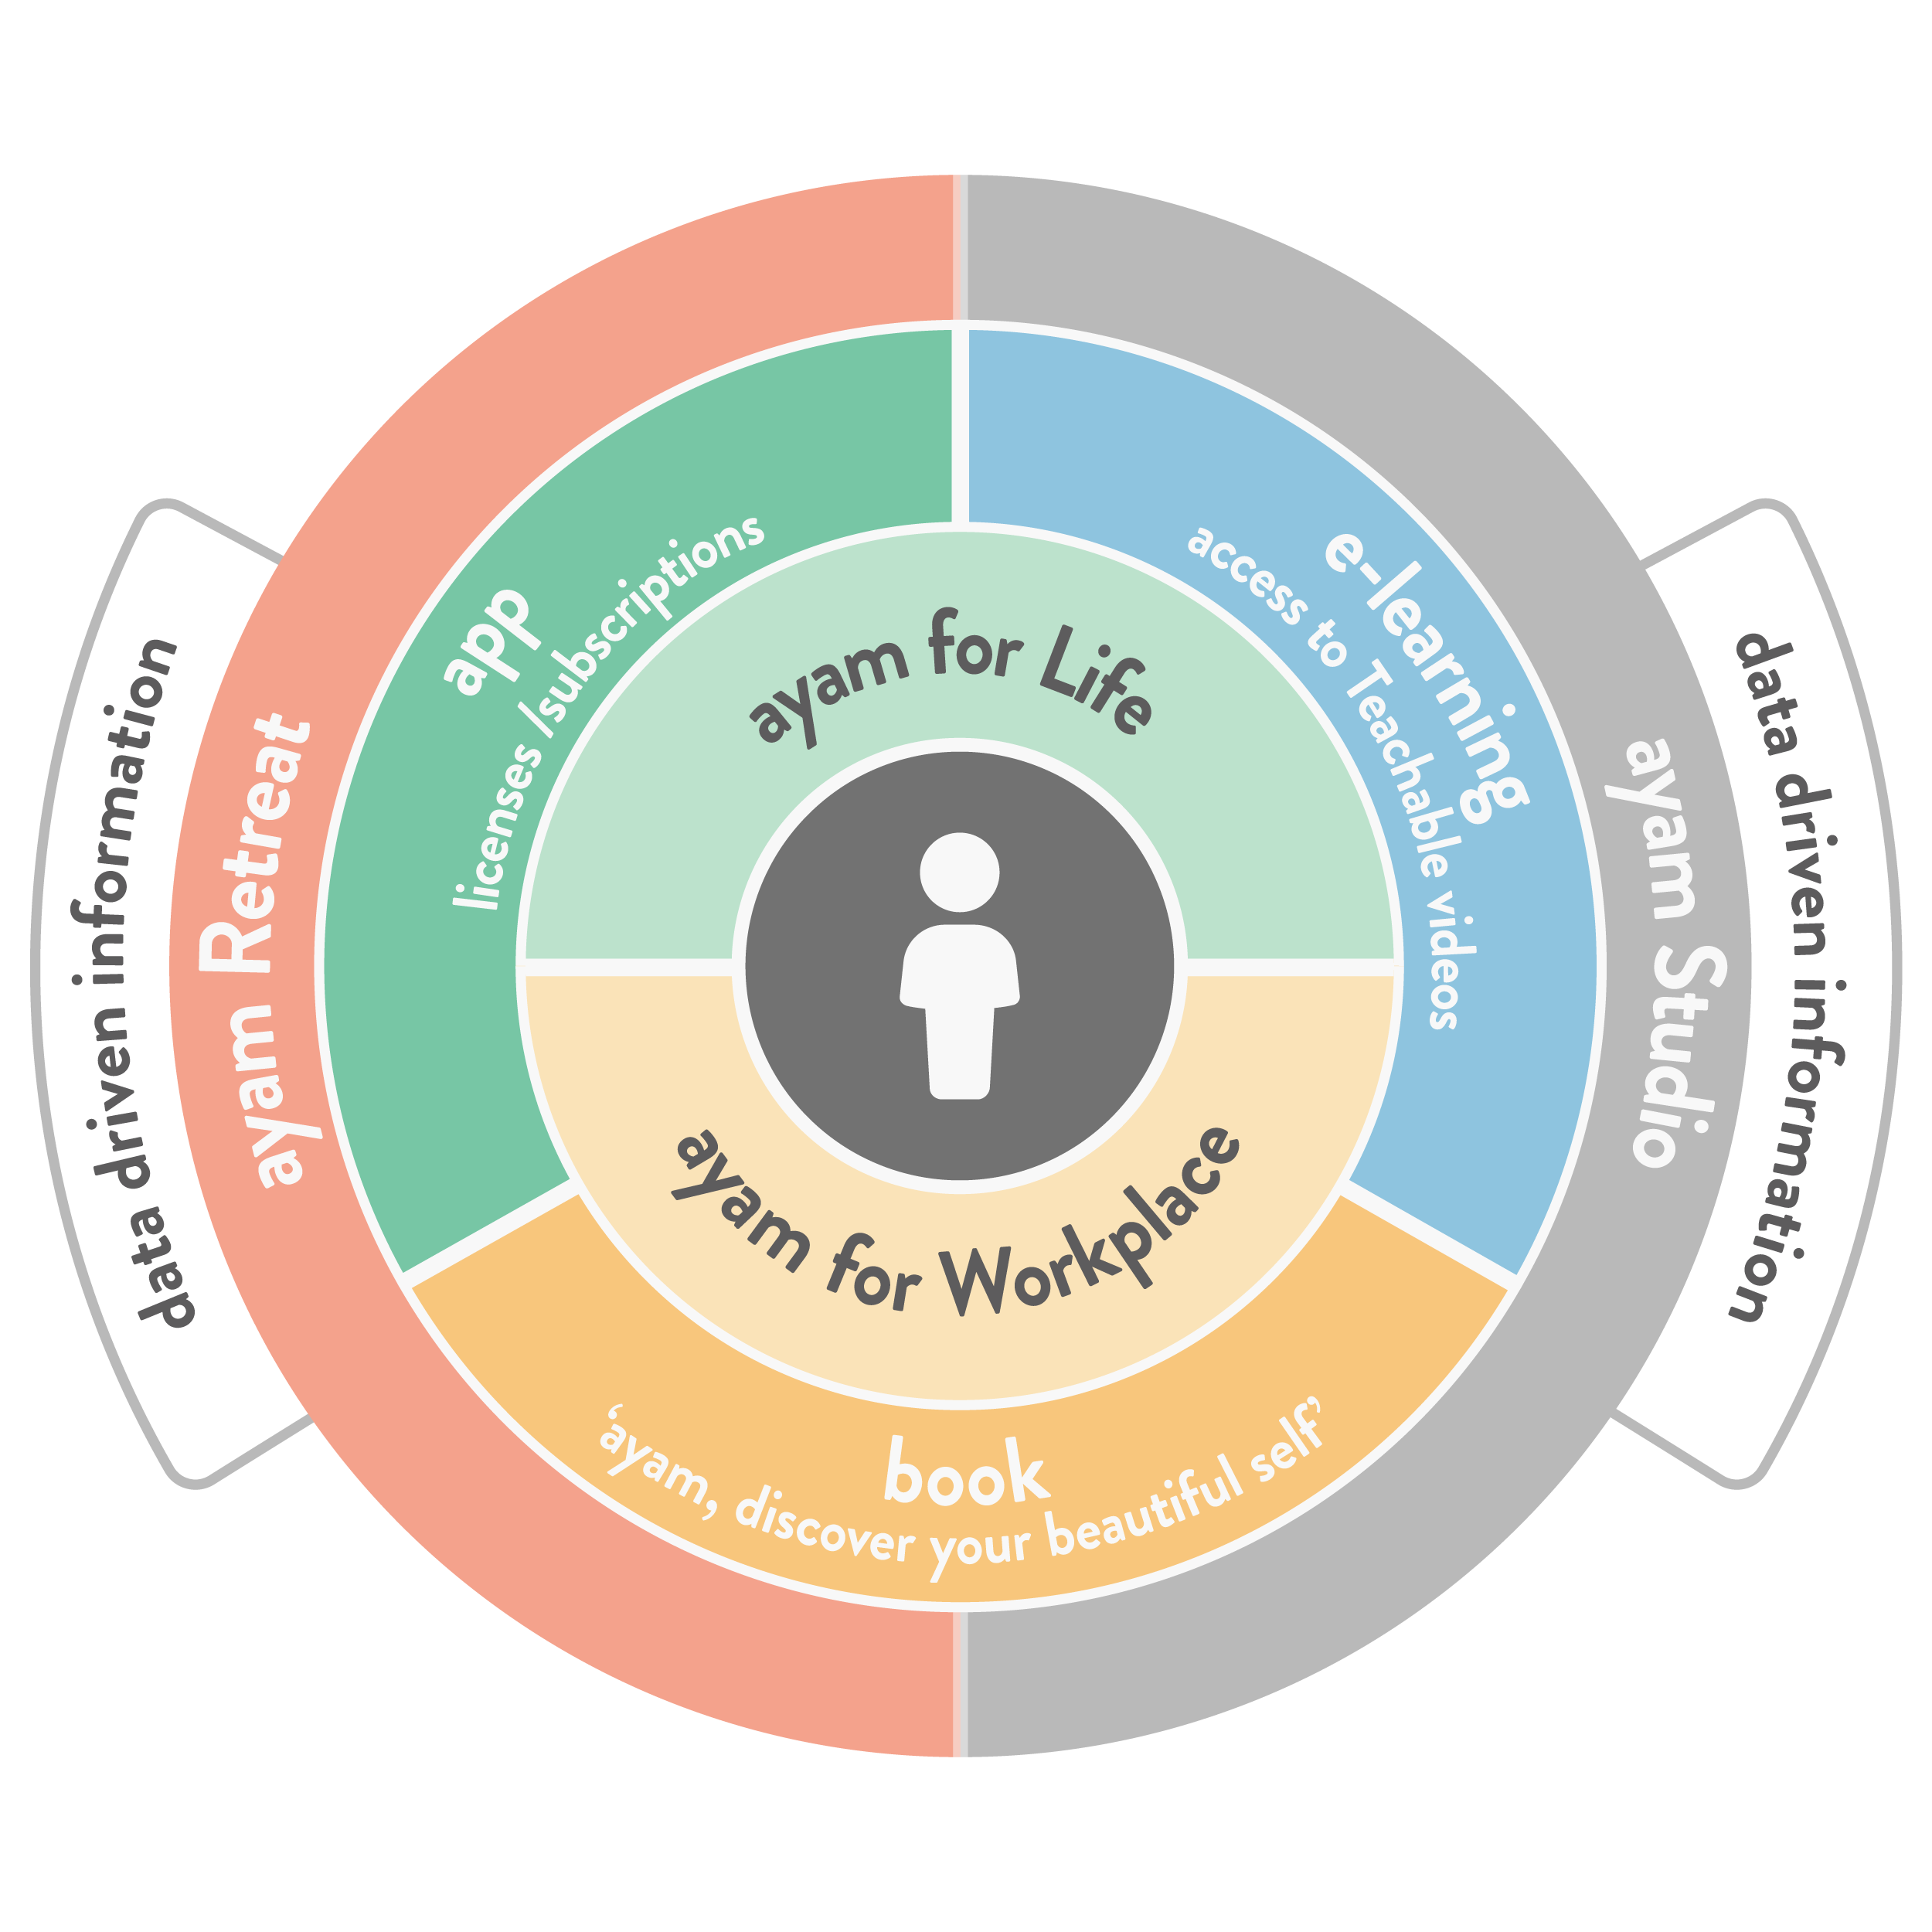 6662-wellbeingatworkdiagram-16467825295825.png